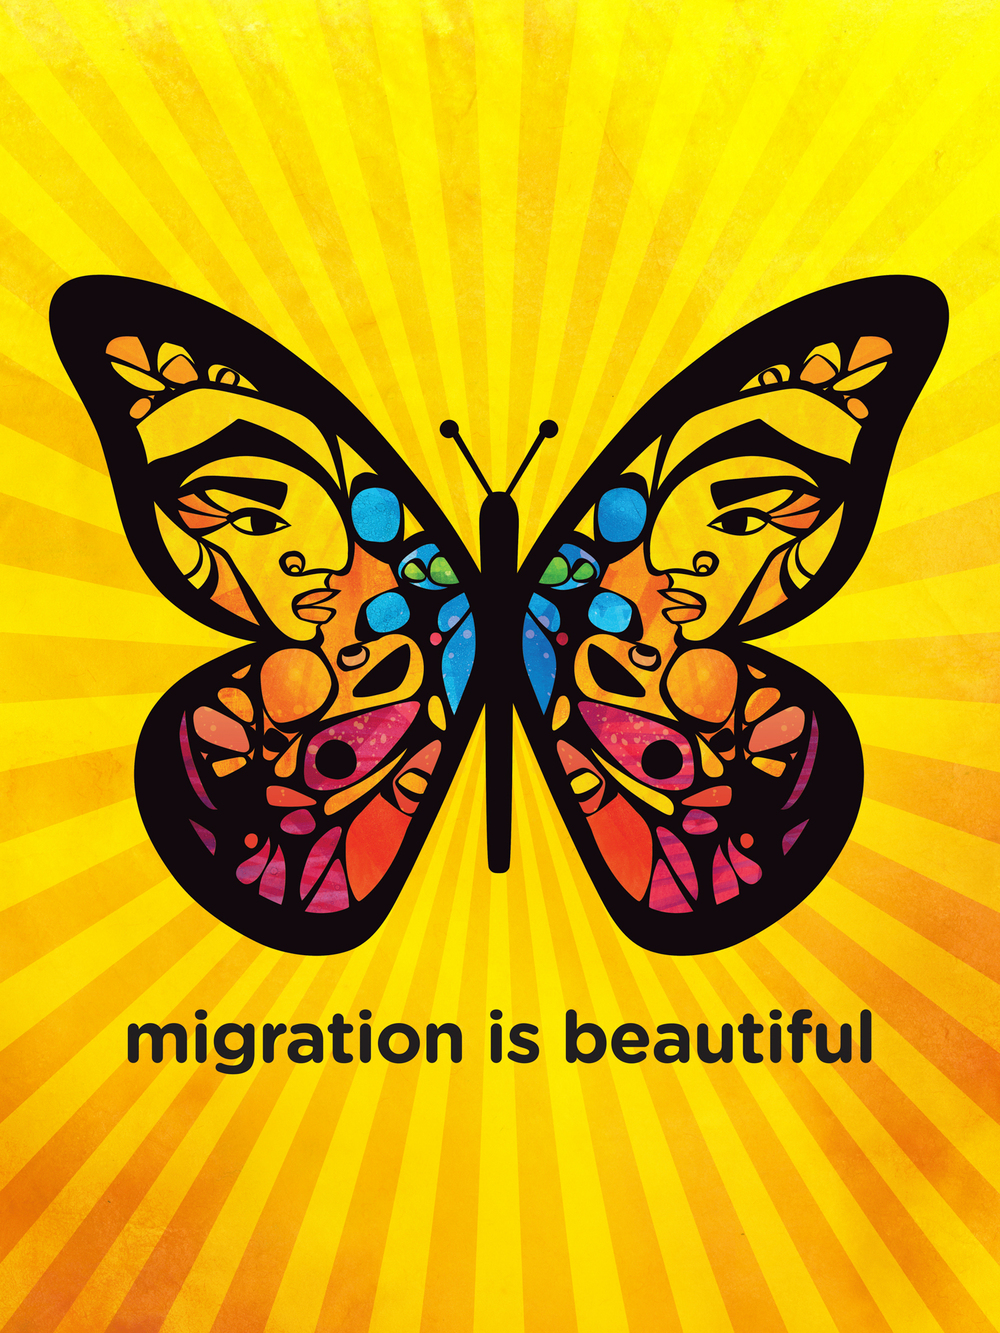 The monarch butterfly representing the beauty of migration